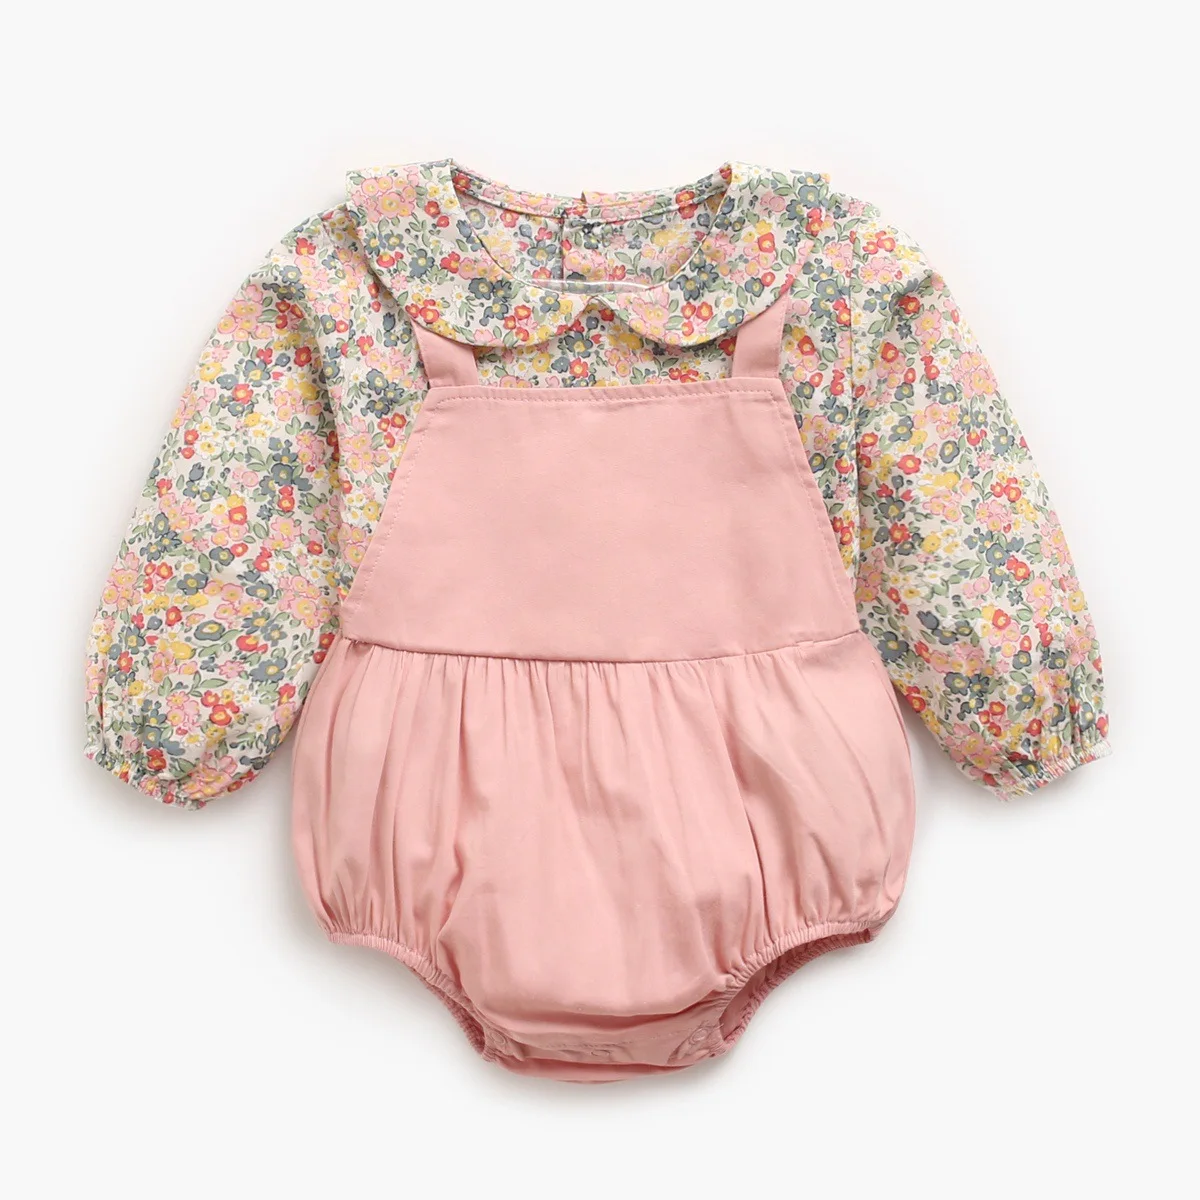 

lyc-3623 2021 Infant Autumn Print Floral Rompers Bodysuits Newborn Cotton Baby Clothes Baby Girl Long Sleeve Jumpsuit, As picture